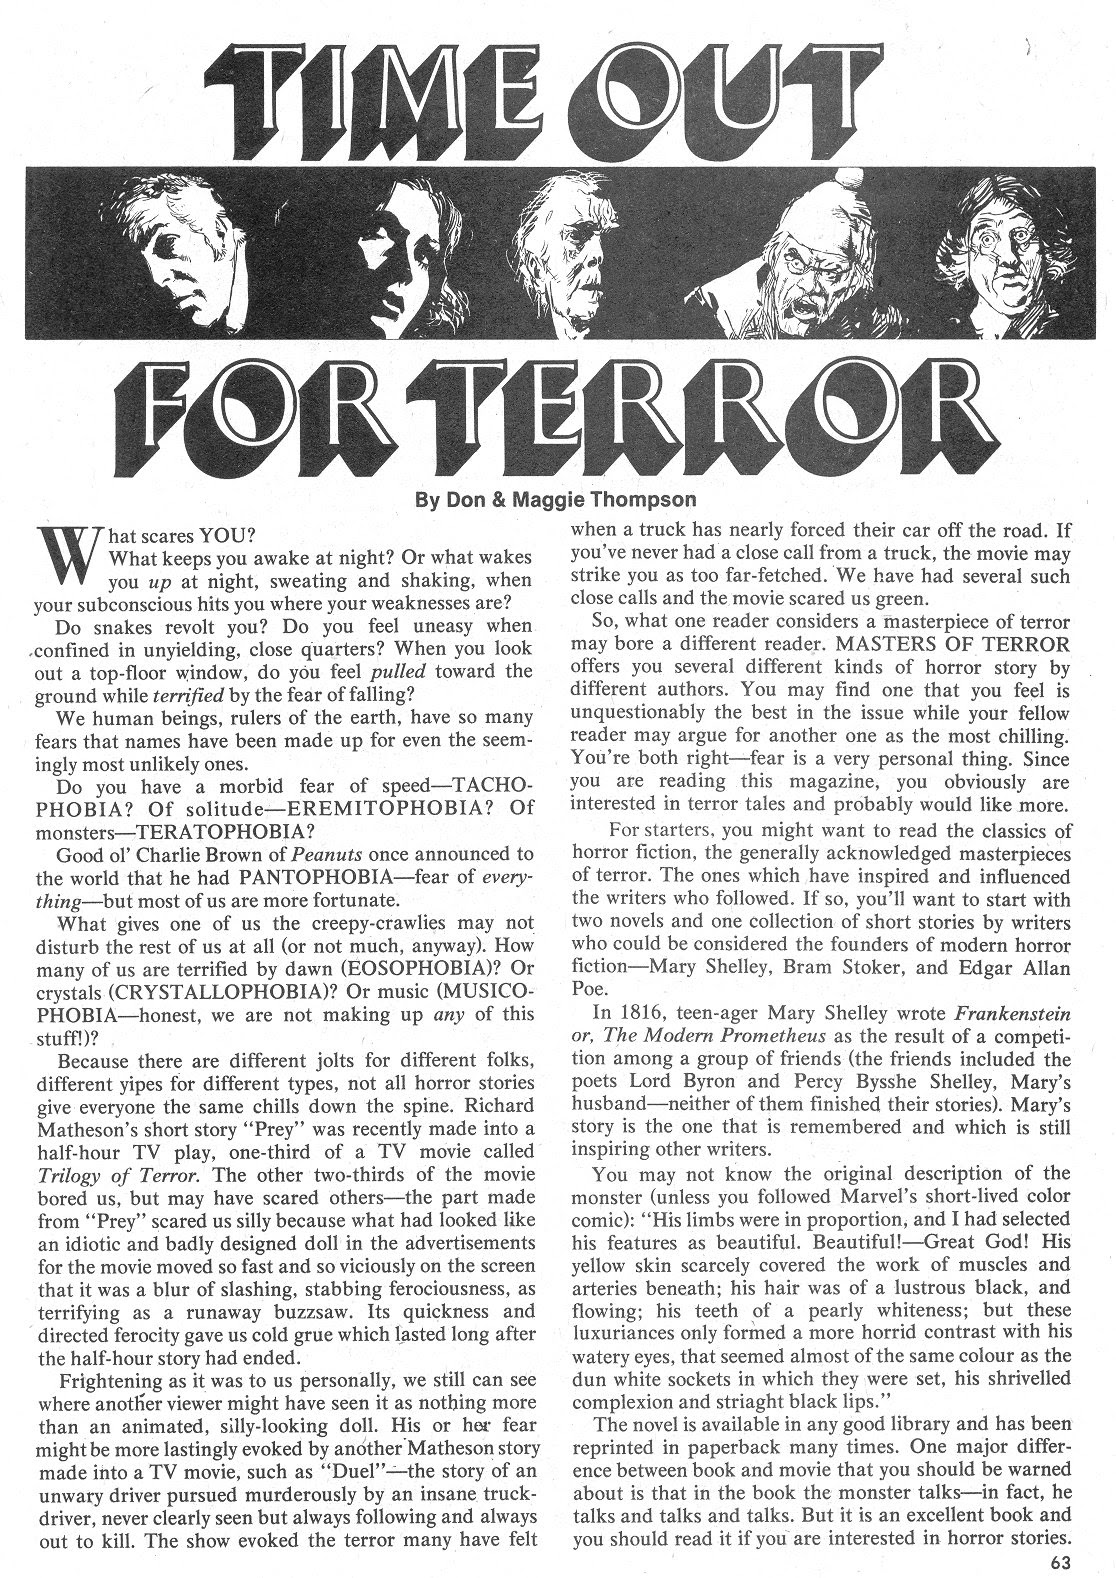 Read online Masters of Terror comic -  Issue #2 - 61